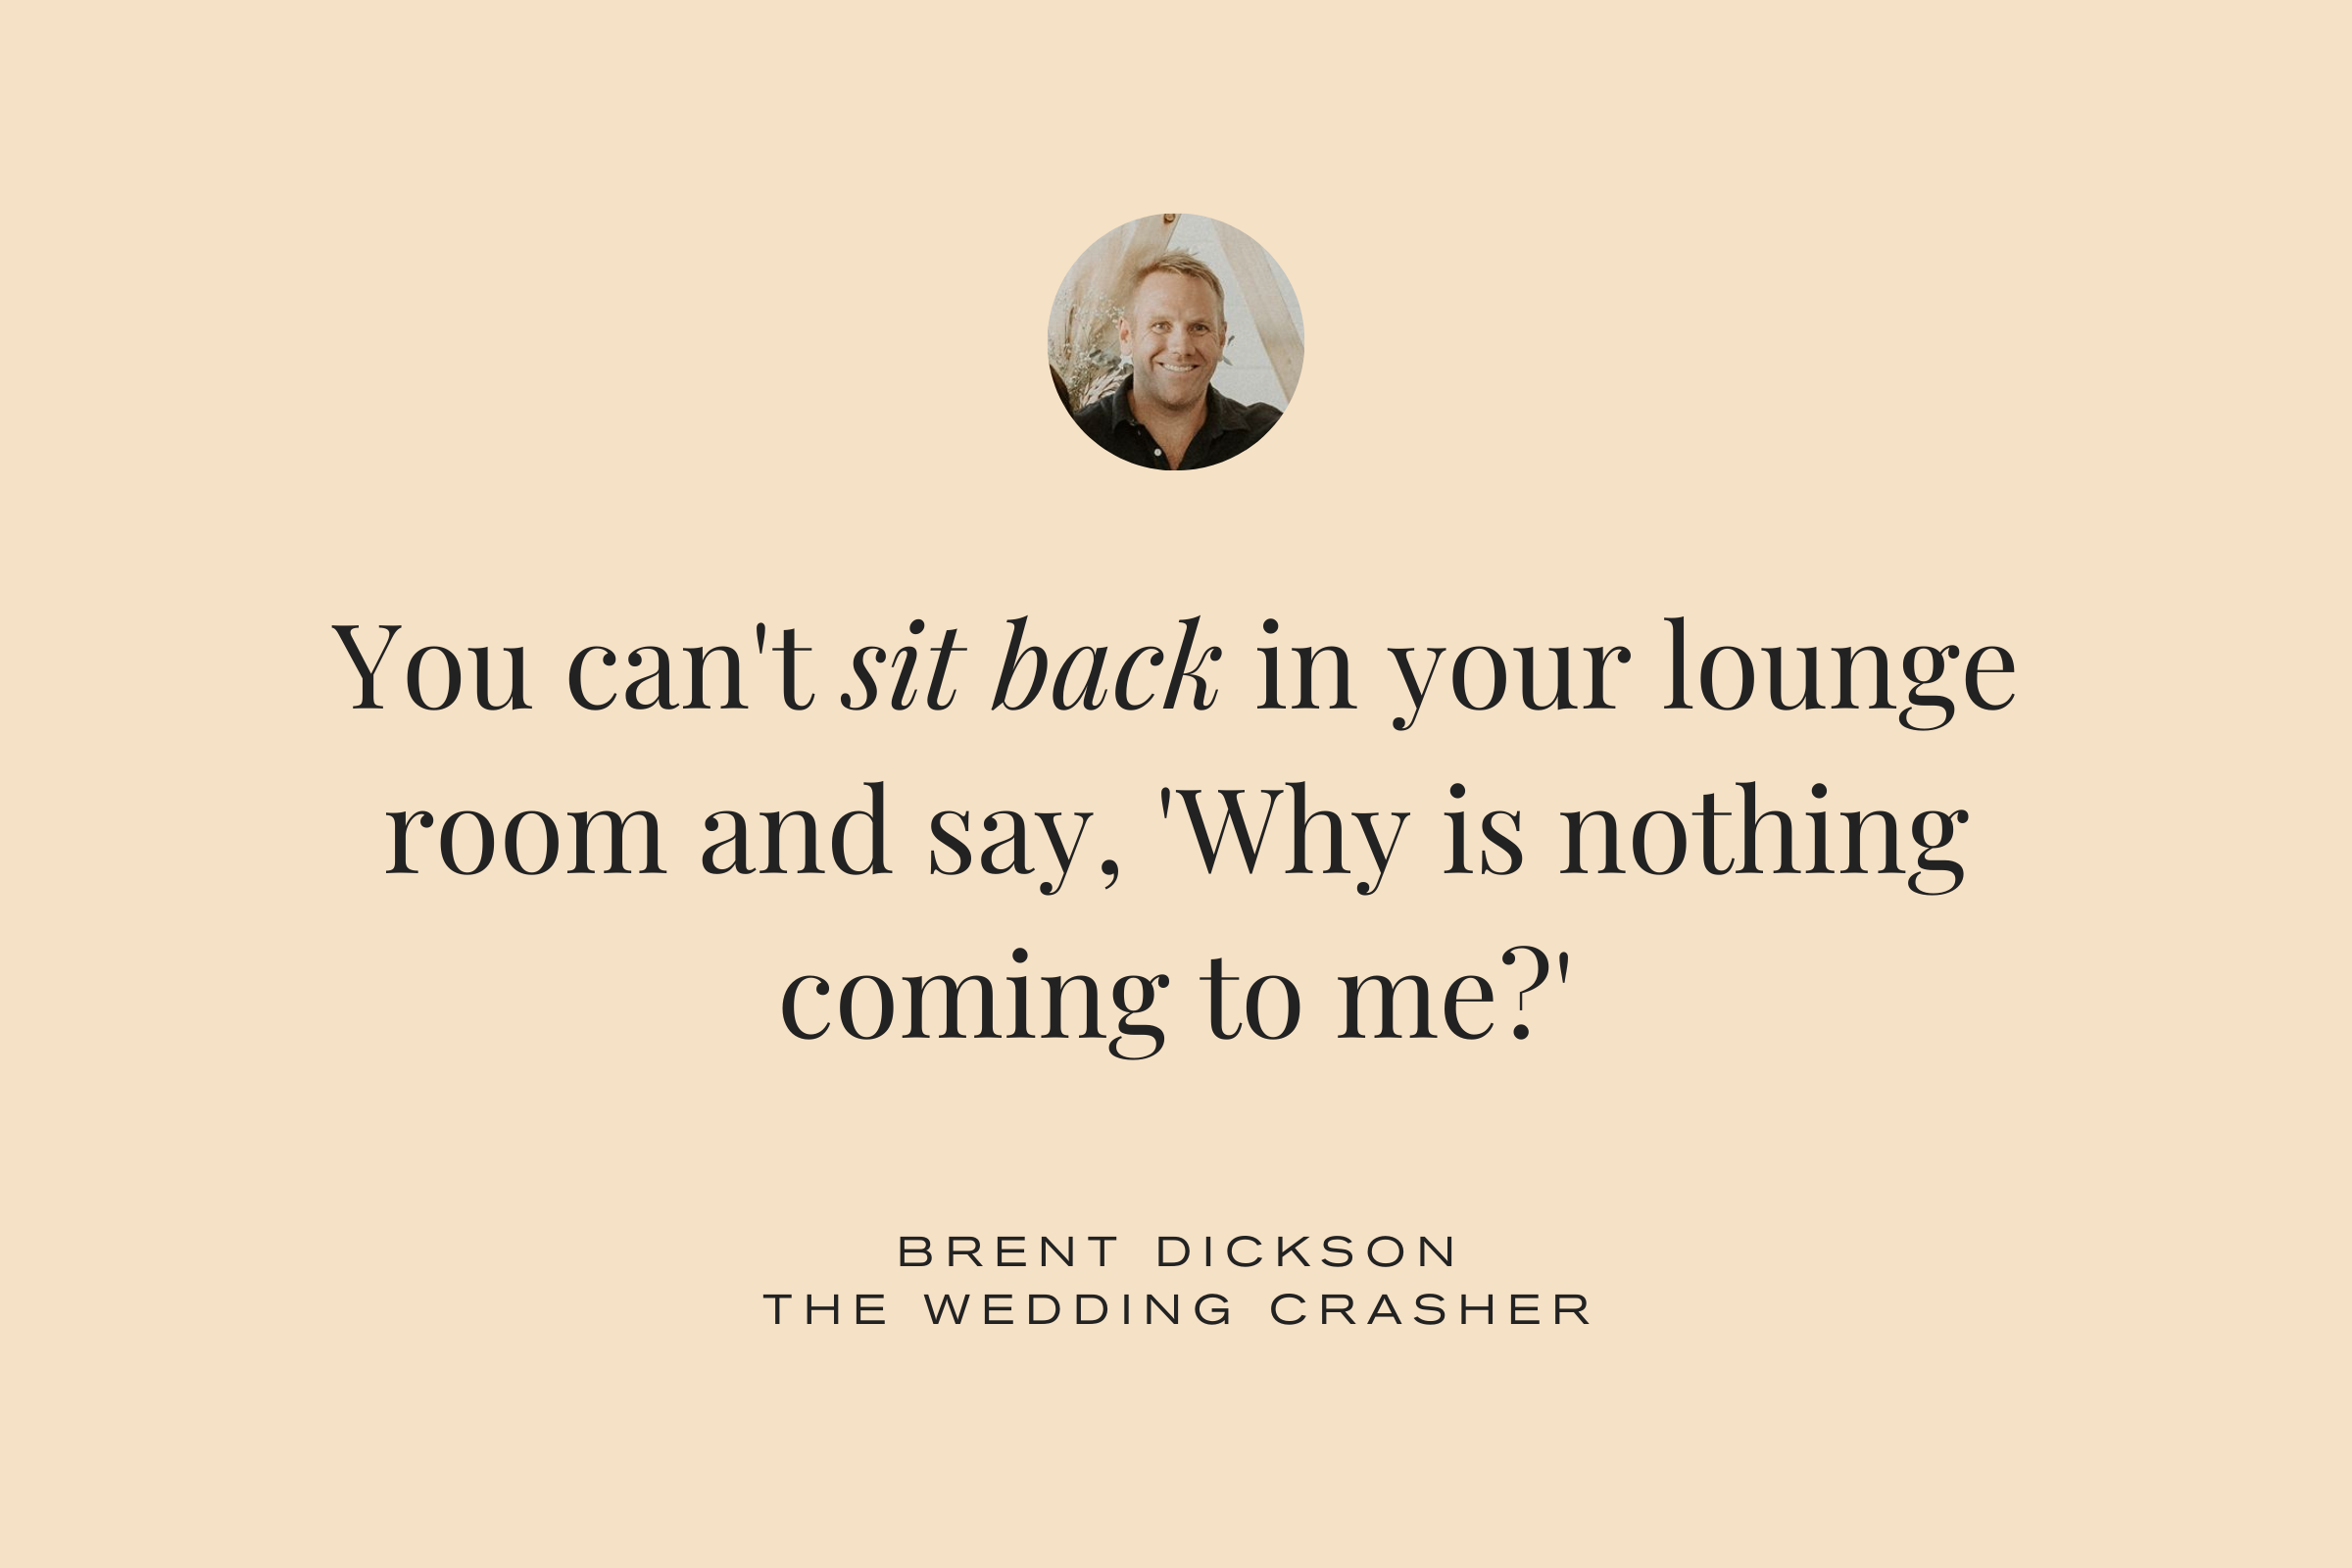 Brent Dickson The Wedding Crasher quote: You can't sit in your lounge room and say why am I getting nothing coming to me?